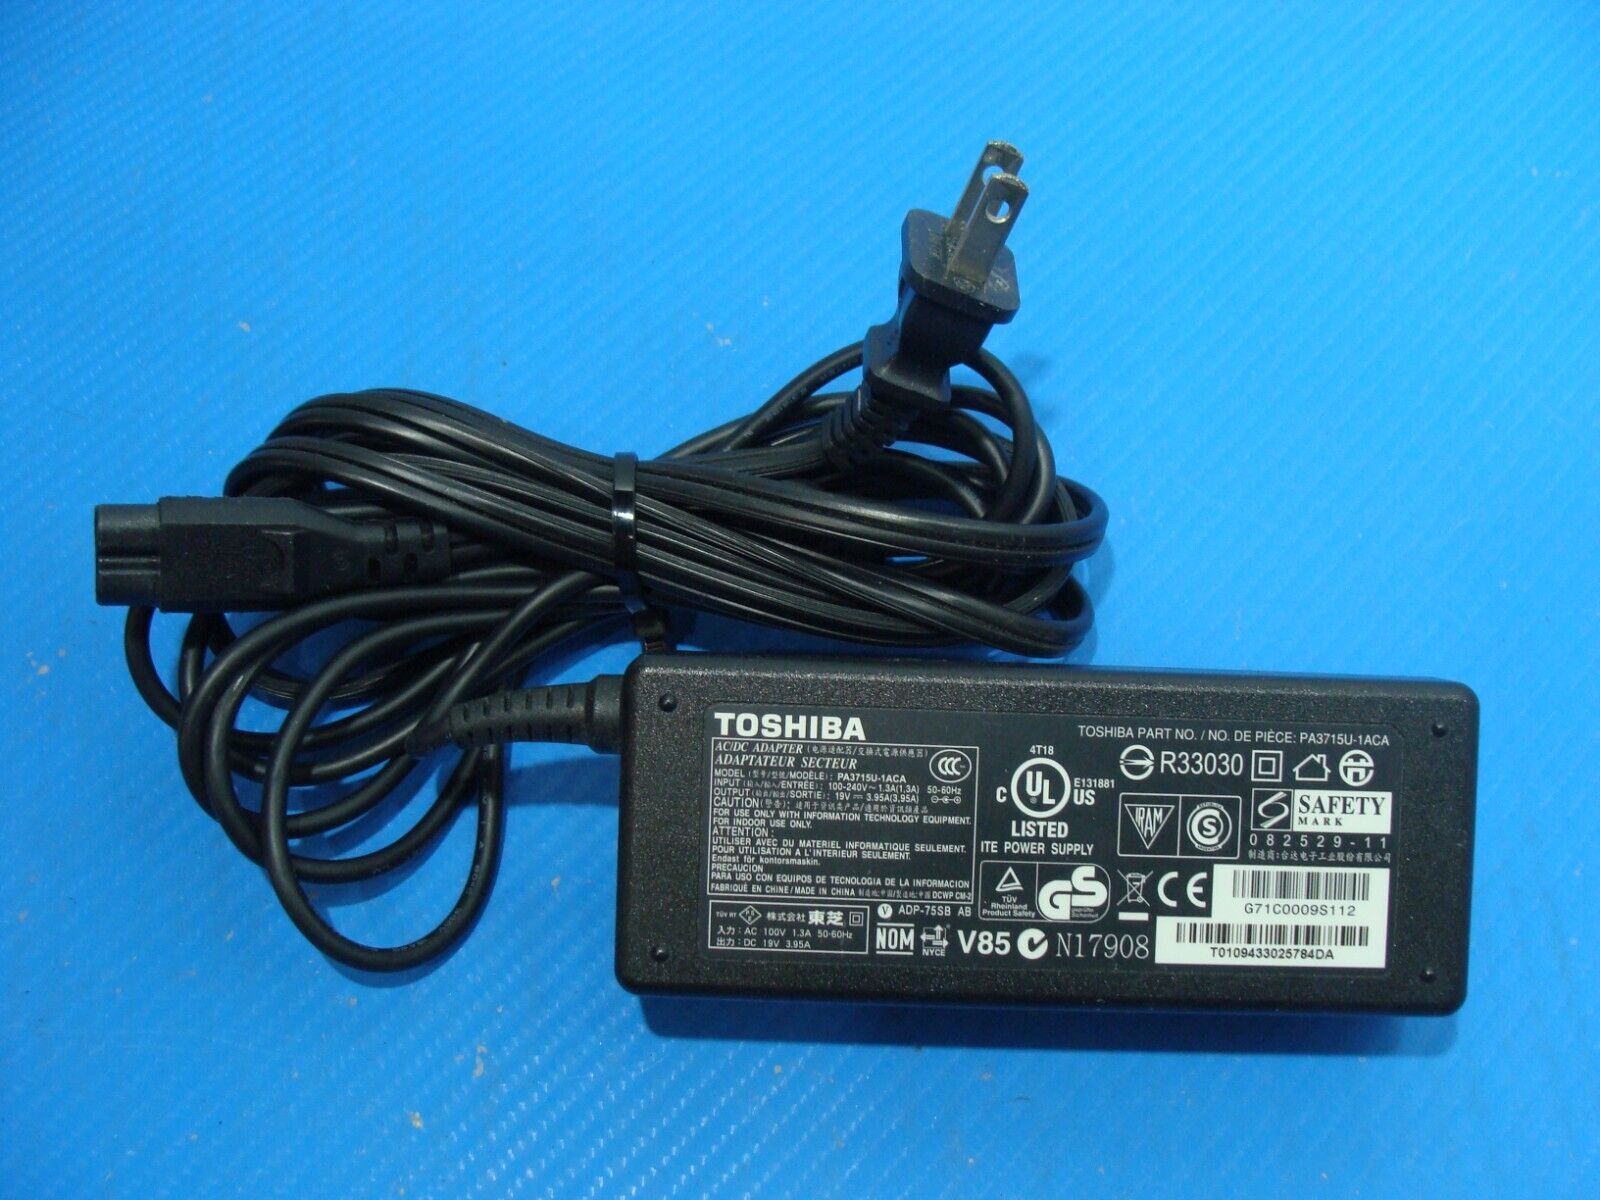 75W Genuine Toshiba Adapter Charger for Toshiba L755-S5257 L755-S5255 L755-S5242